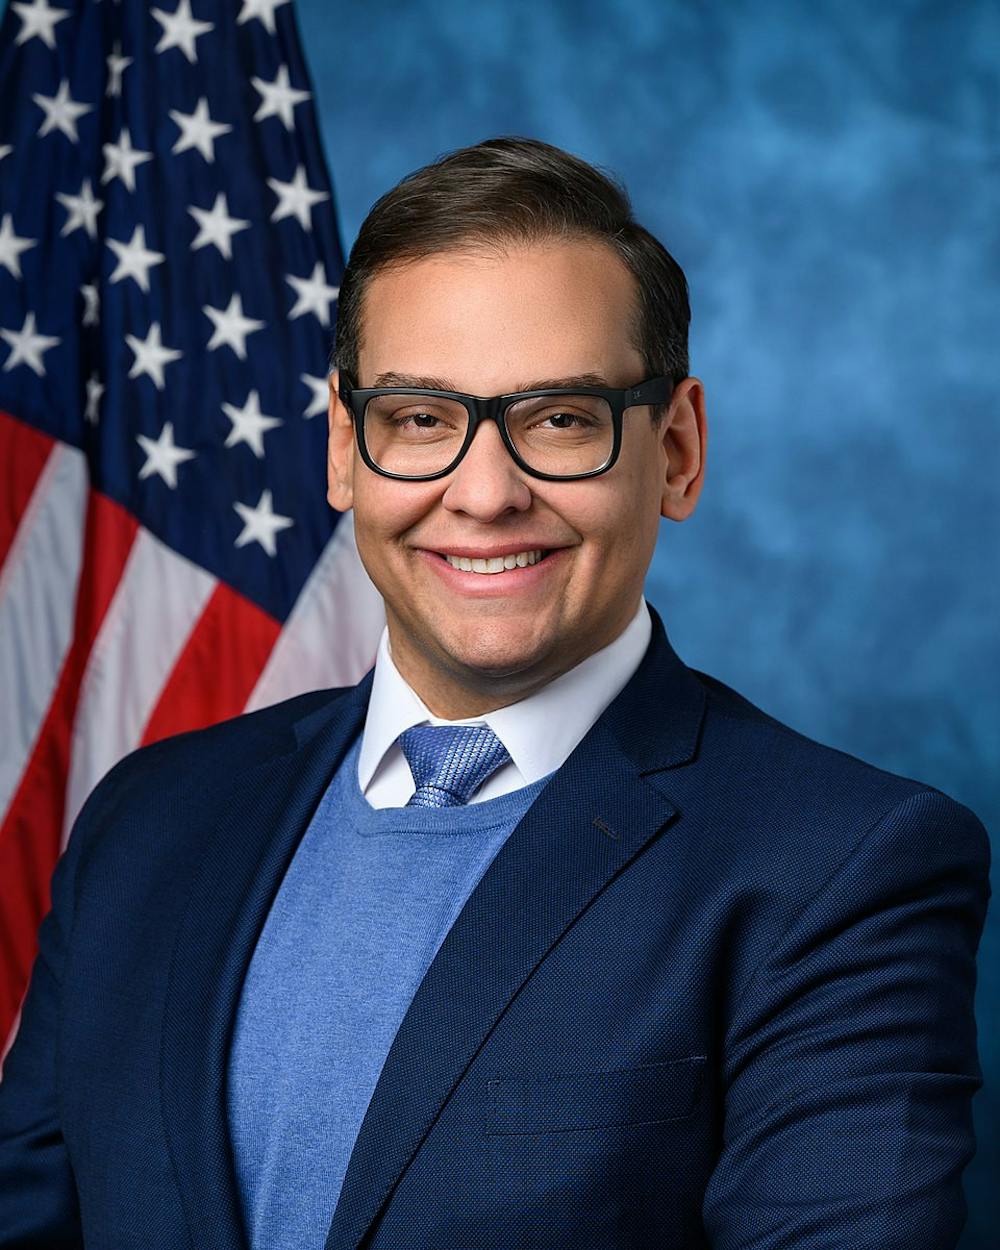 <p><em>Federal prosecutors have accused Rep. George Santos of stealing donor’s identities and fraudulently ringing up tens of thousands of dollars on their credit cards in unauthorized charges (Photo courtesy of Wikimedia Commons/“</em><a href="https://commons.wikimedia.org/wiki/File:Rep._George_Santos_Official_Portrait.jpg" target=""><em>Rep. George Santos Official Portrait</em></a><em>” by U.S. House Office of Photography. December 2, 2022). </em></p>